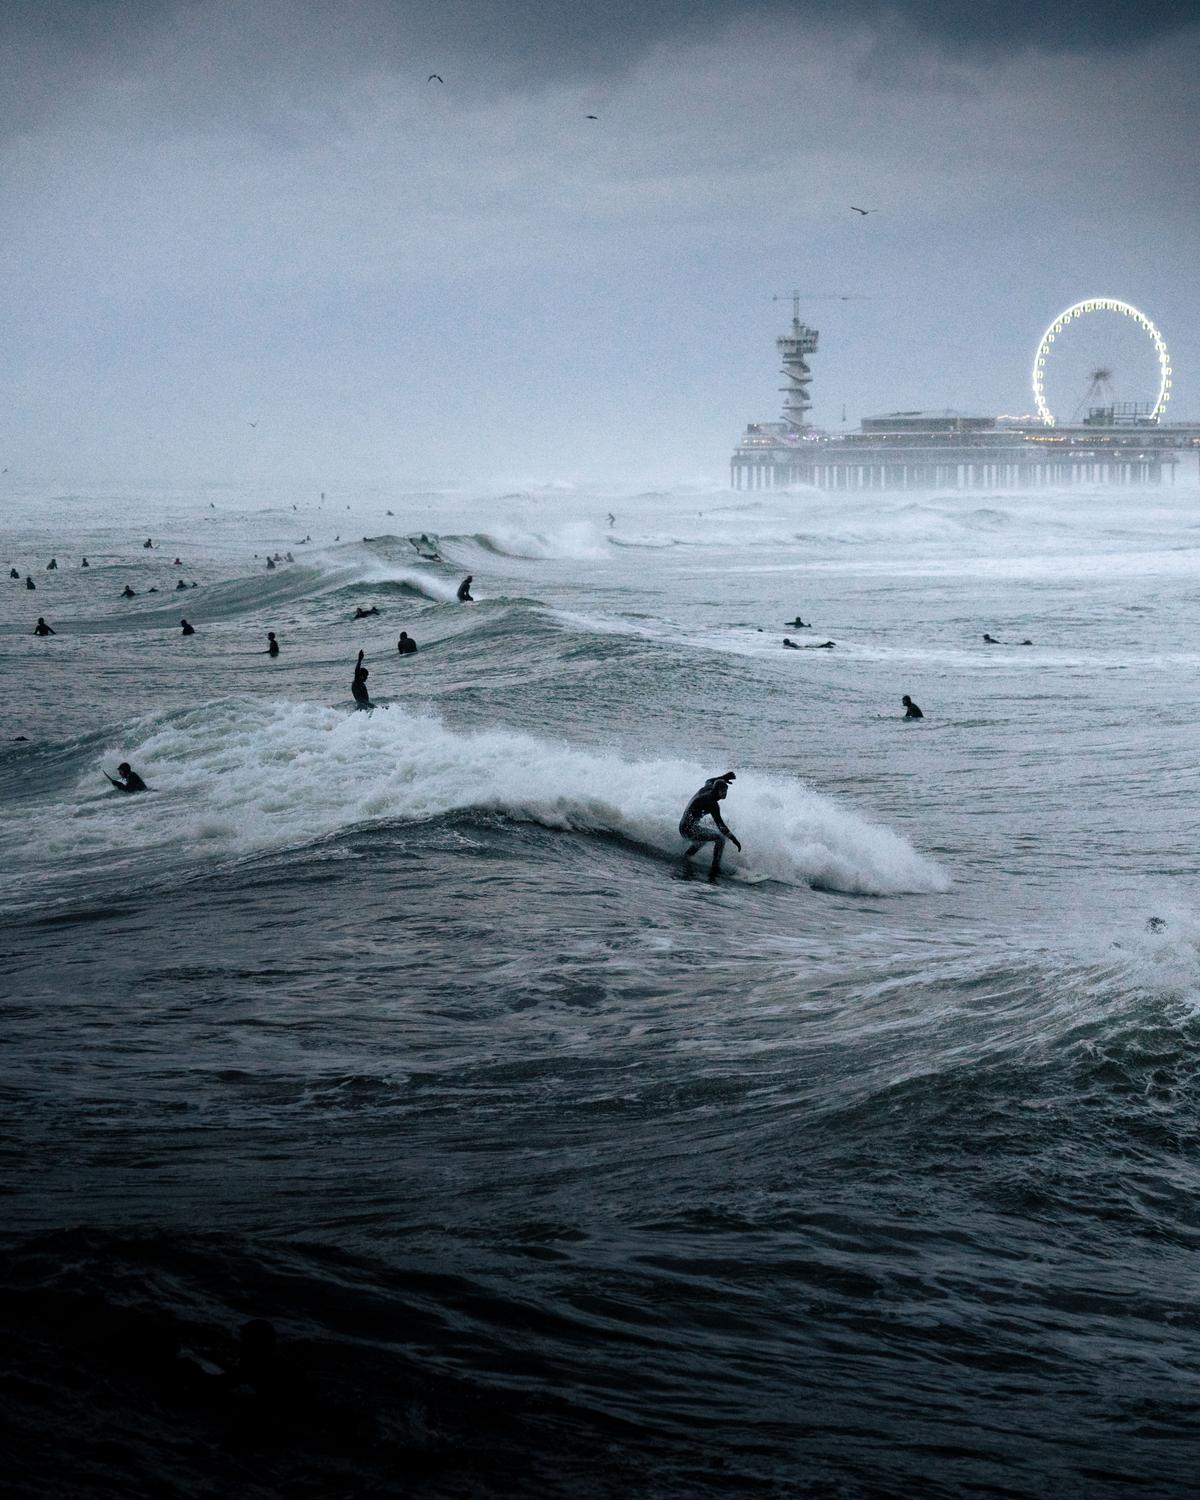 "Surfing Festival" by Raido Nurk, Estonia; "The waves were the biggest I’ve ever seen in the evening when I took this photo in The Hague, Netherlands. The waves and the pouring rain created quite a unique atmosphere." (© Raido Nurk, Estonia, Winner, National Awards, Motion, 2022 Sony World Photography Awards)